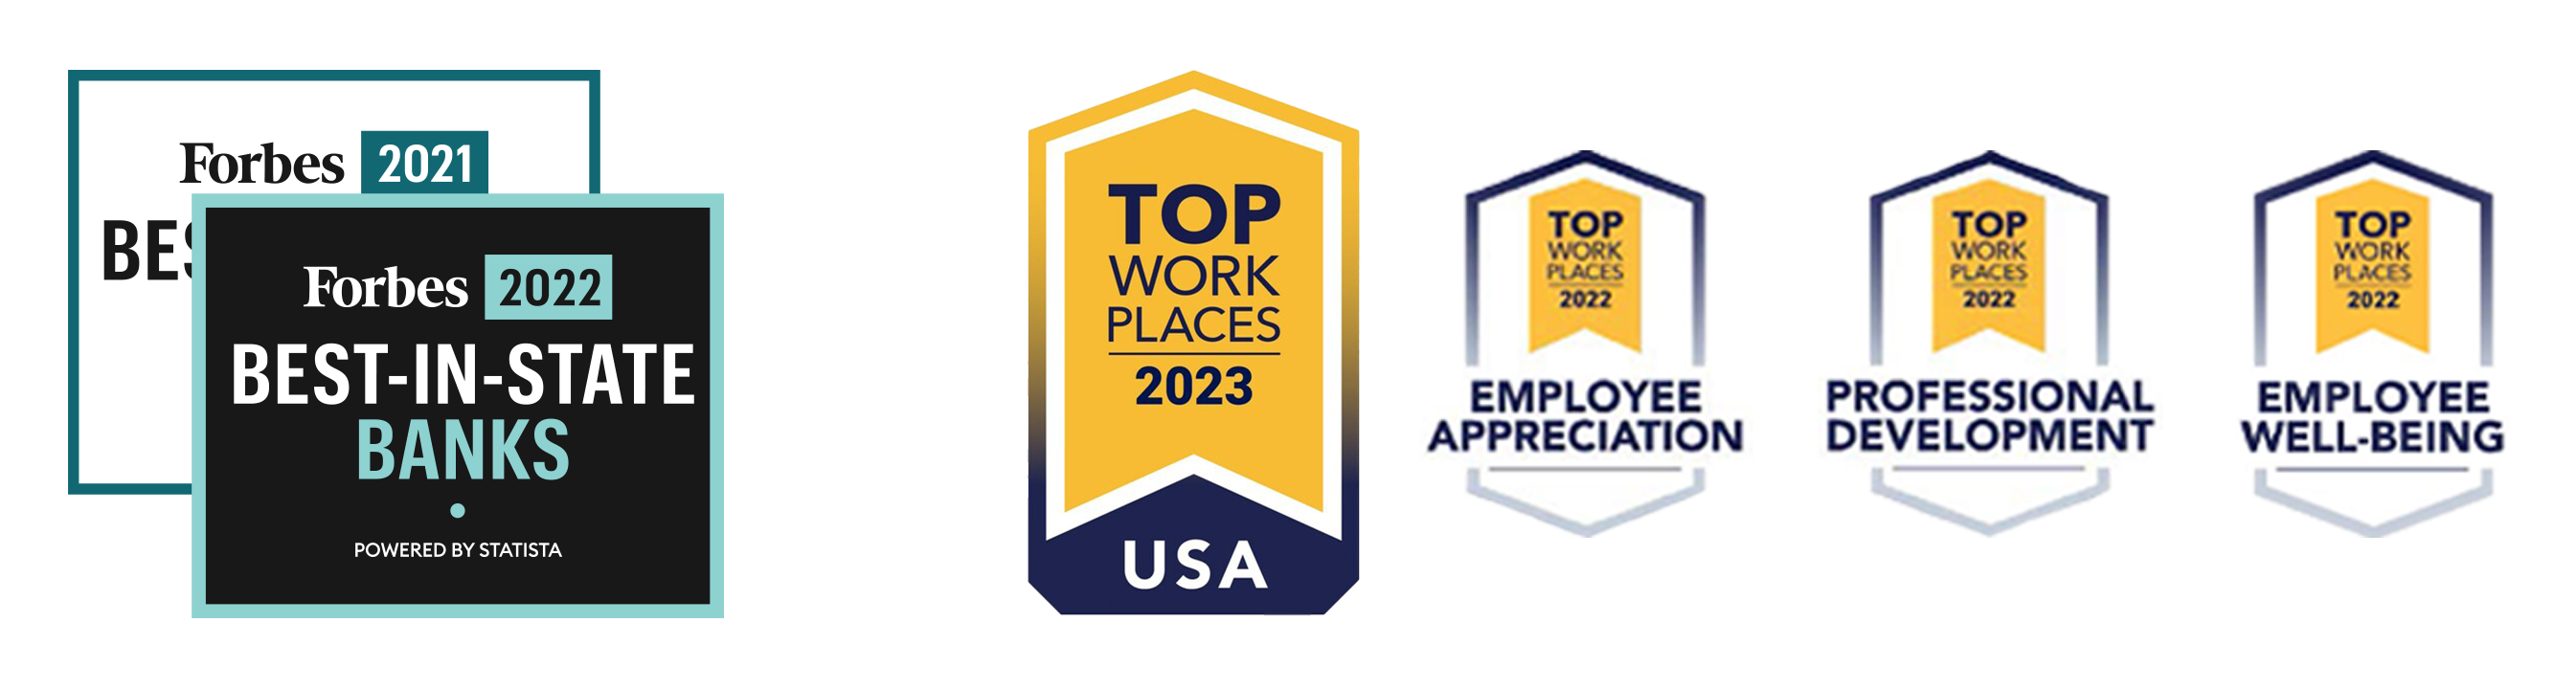 Top-Workplace-Forbes-USA-silo.png